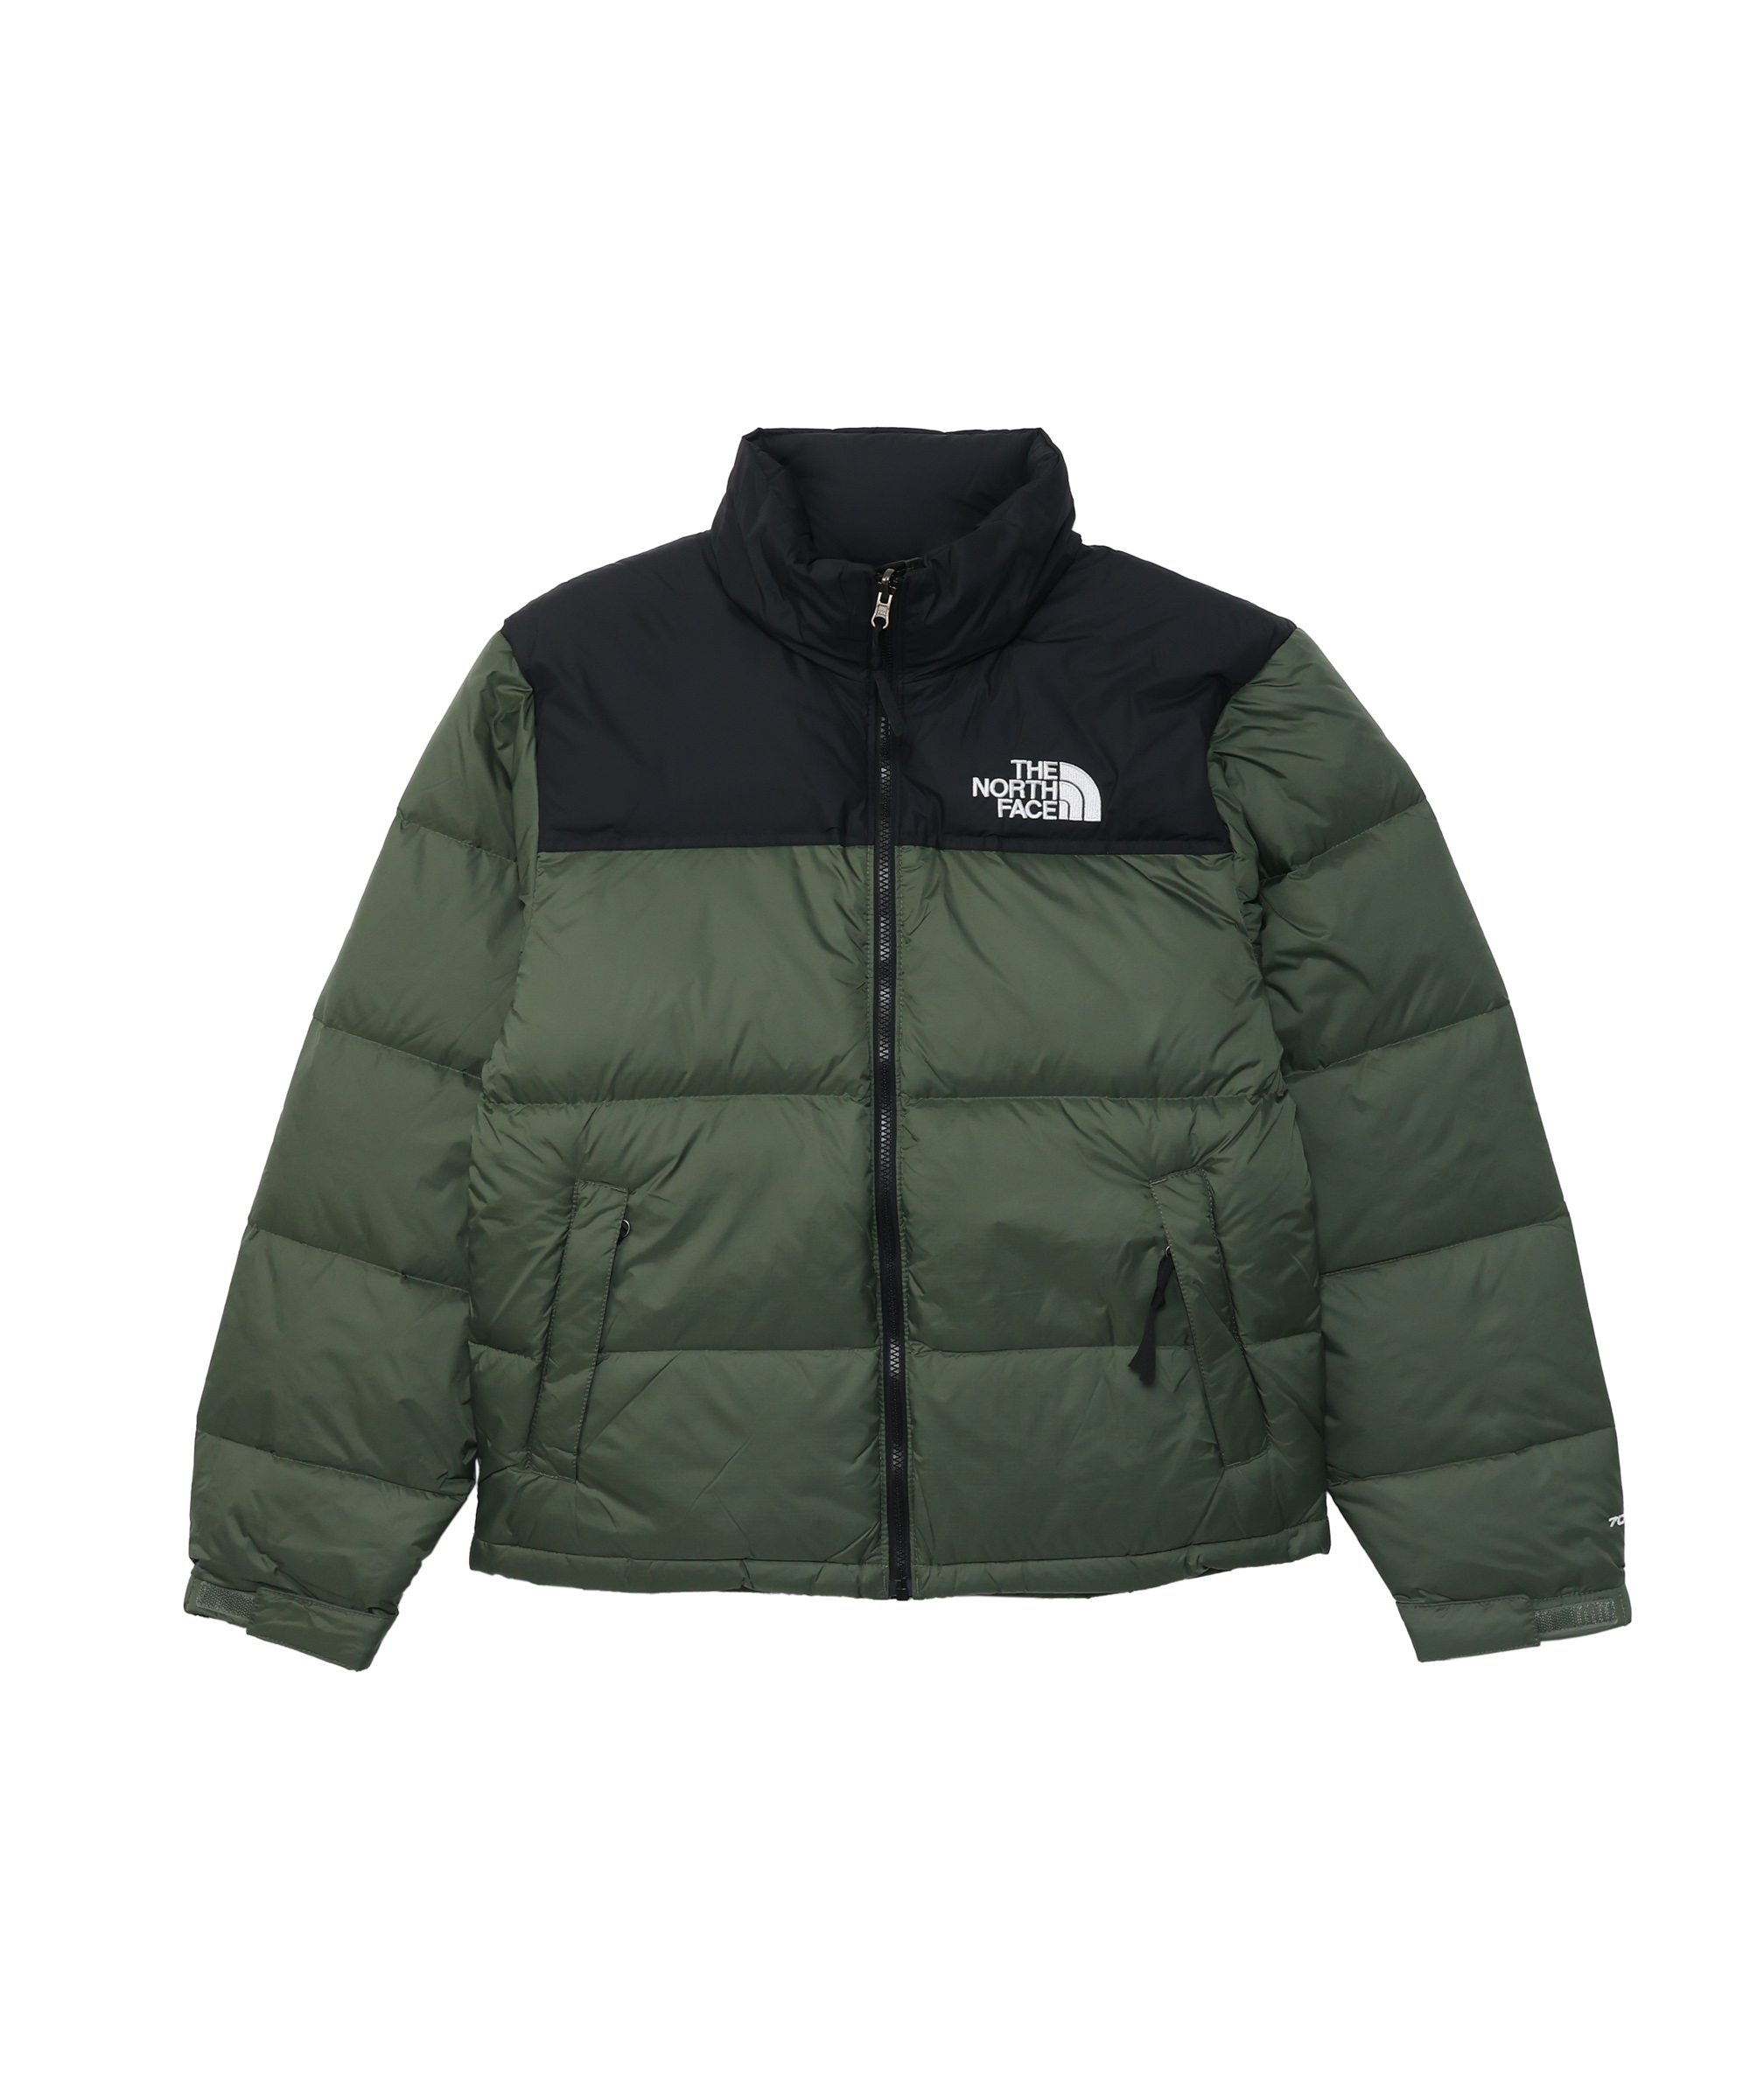 THE NORTH FACE / ヌプシ / 黒 / センター / ダ着丈約64cm